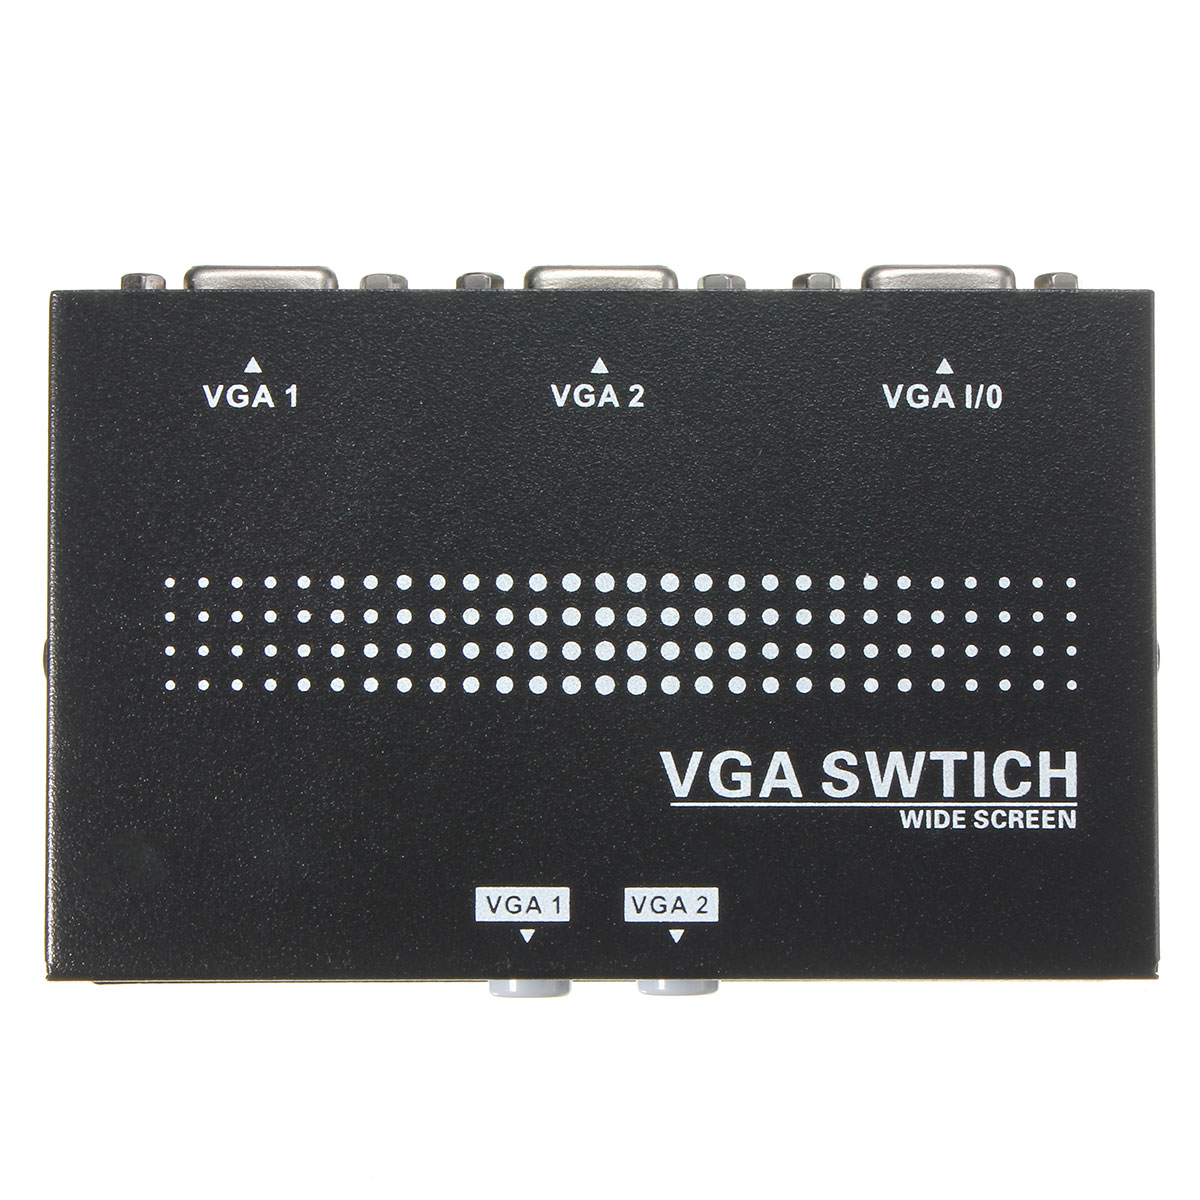 

2 In 1 Out SVGA VGA 2 Ports Two Monitor Manual Splitter Share Video Switcher